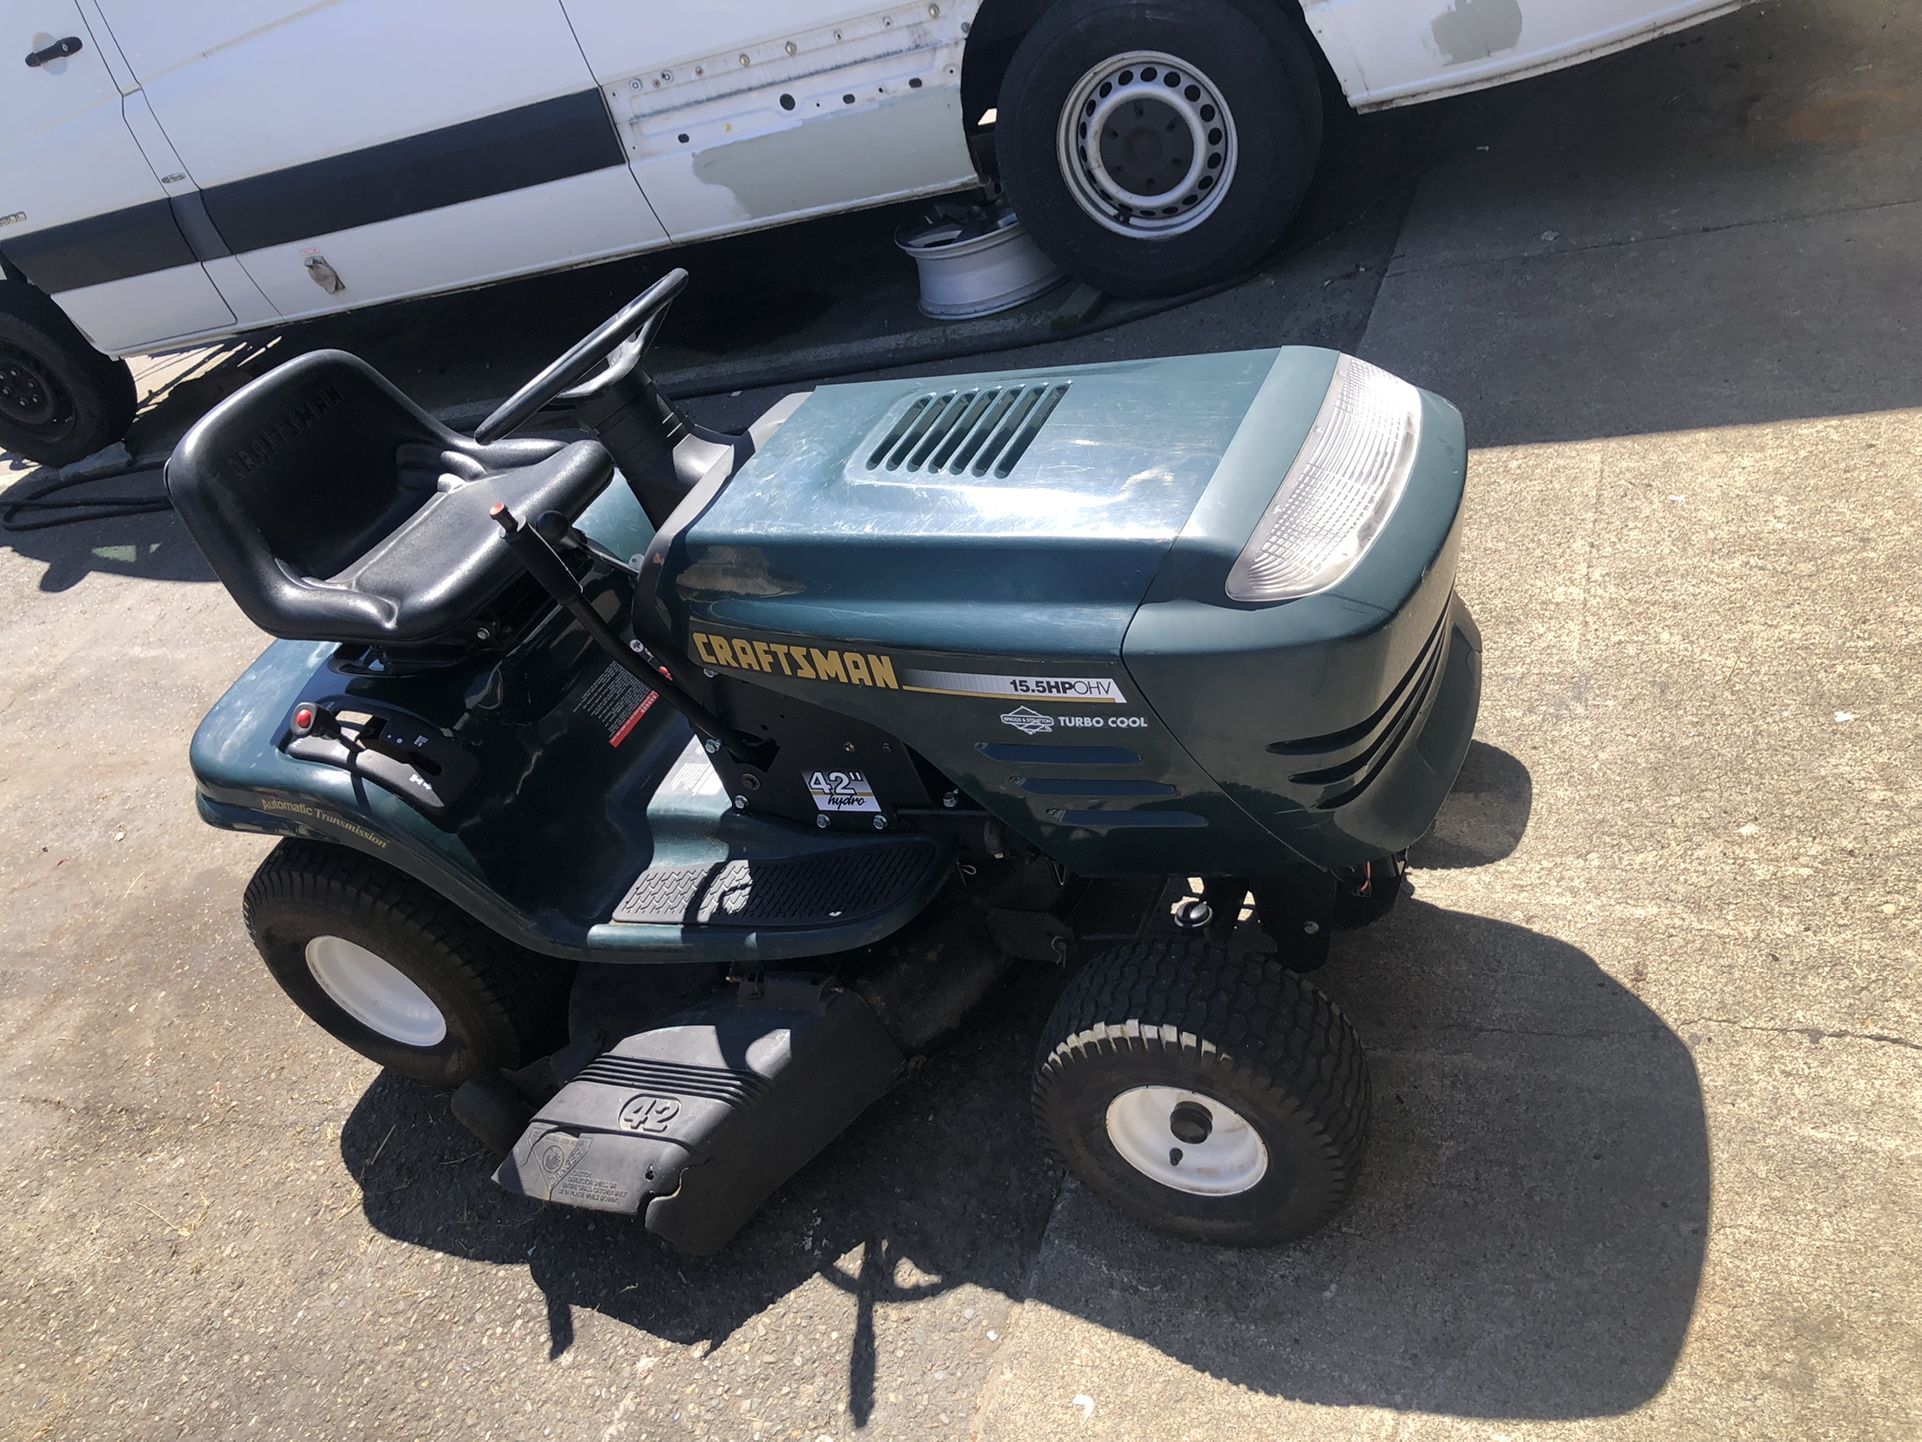 Craftsman Riding lawn mower great condition